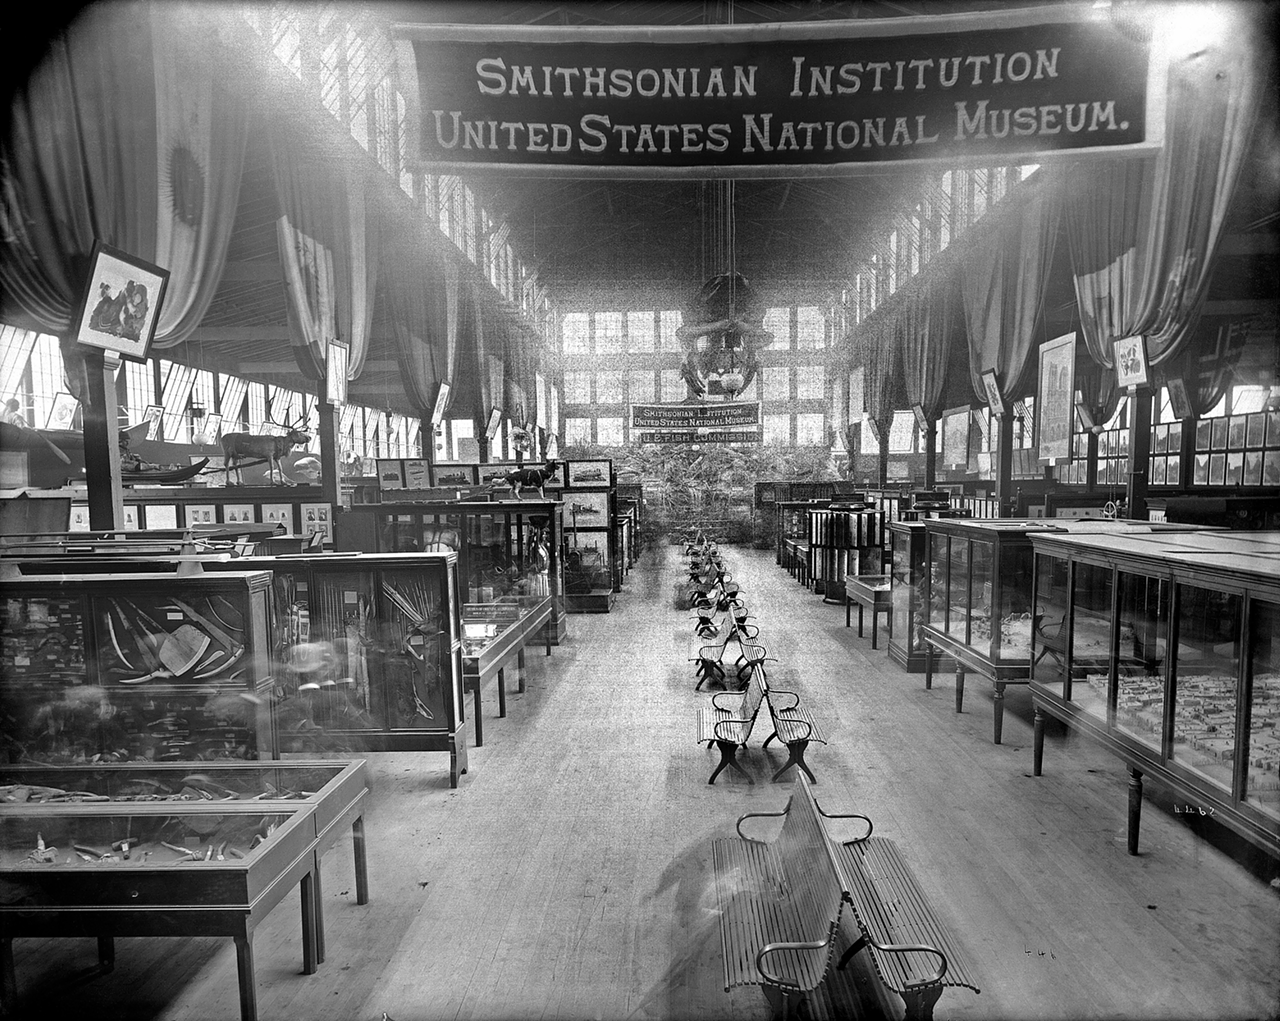 Park Hall housed restaurants and cafés, a hospital, a government display and minerals on loan from Ontario, Canada. Even the Smithsonian Institution contributed a pavilion to Park Hall, coordinating all of the U.S. government exhibits and preparing a display on its own activities and collections. An overview of the Smithsonian Institution's Exhibit Hall.